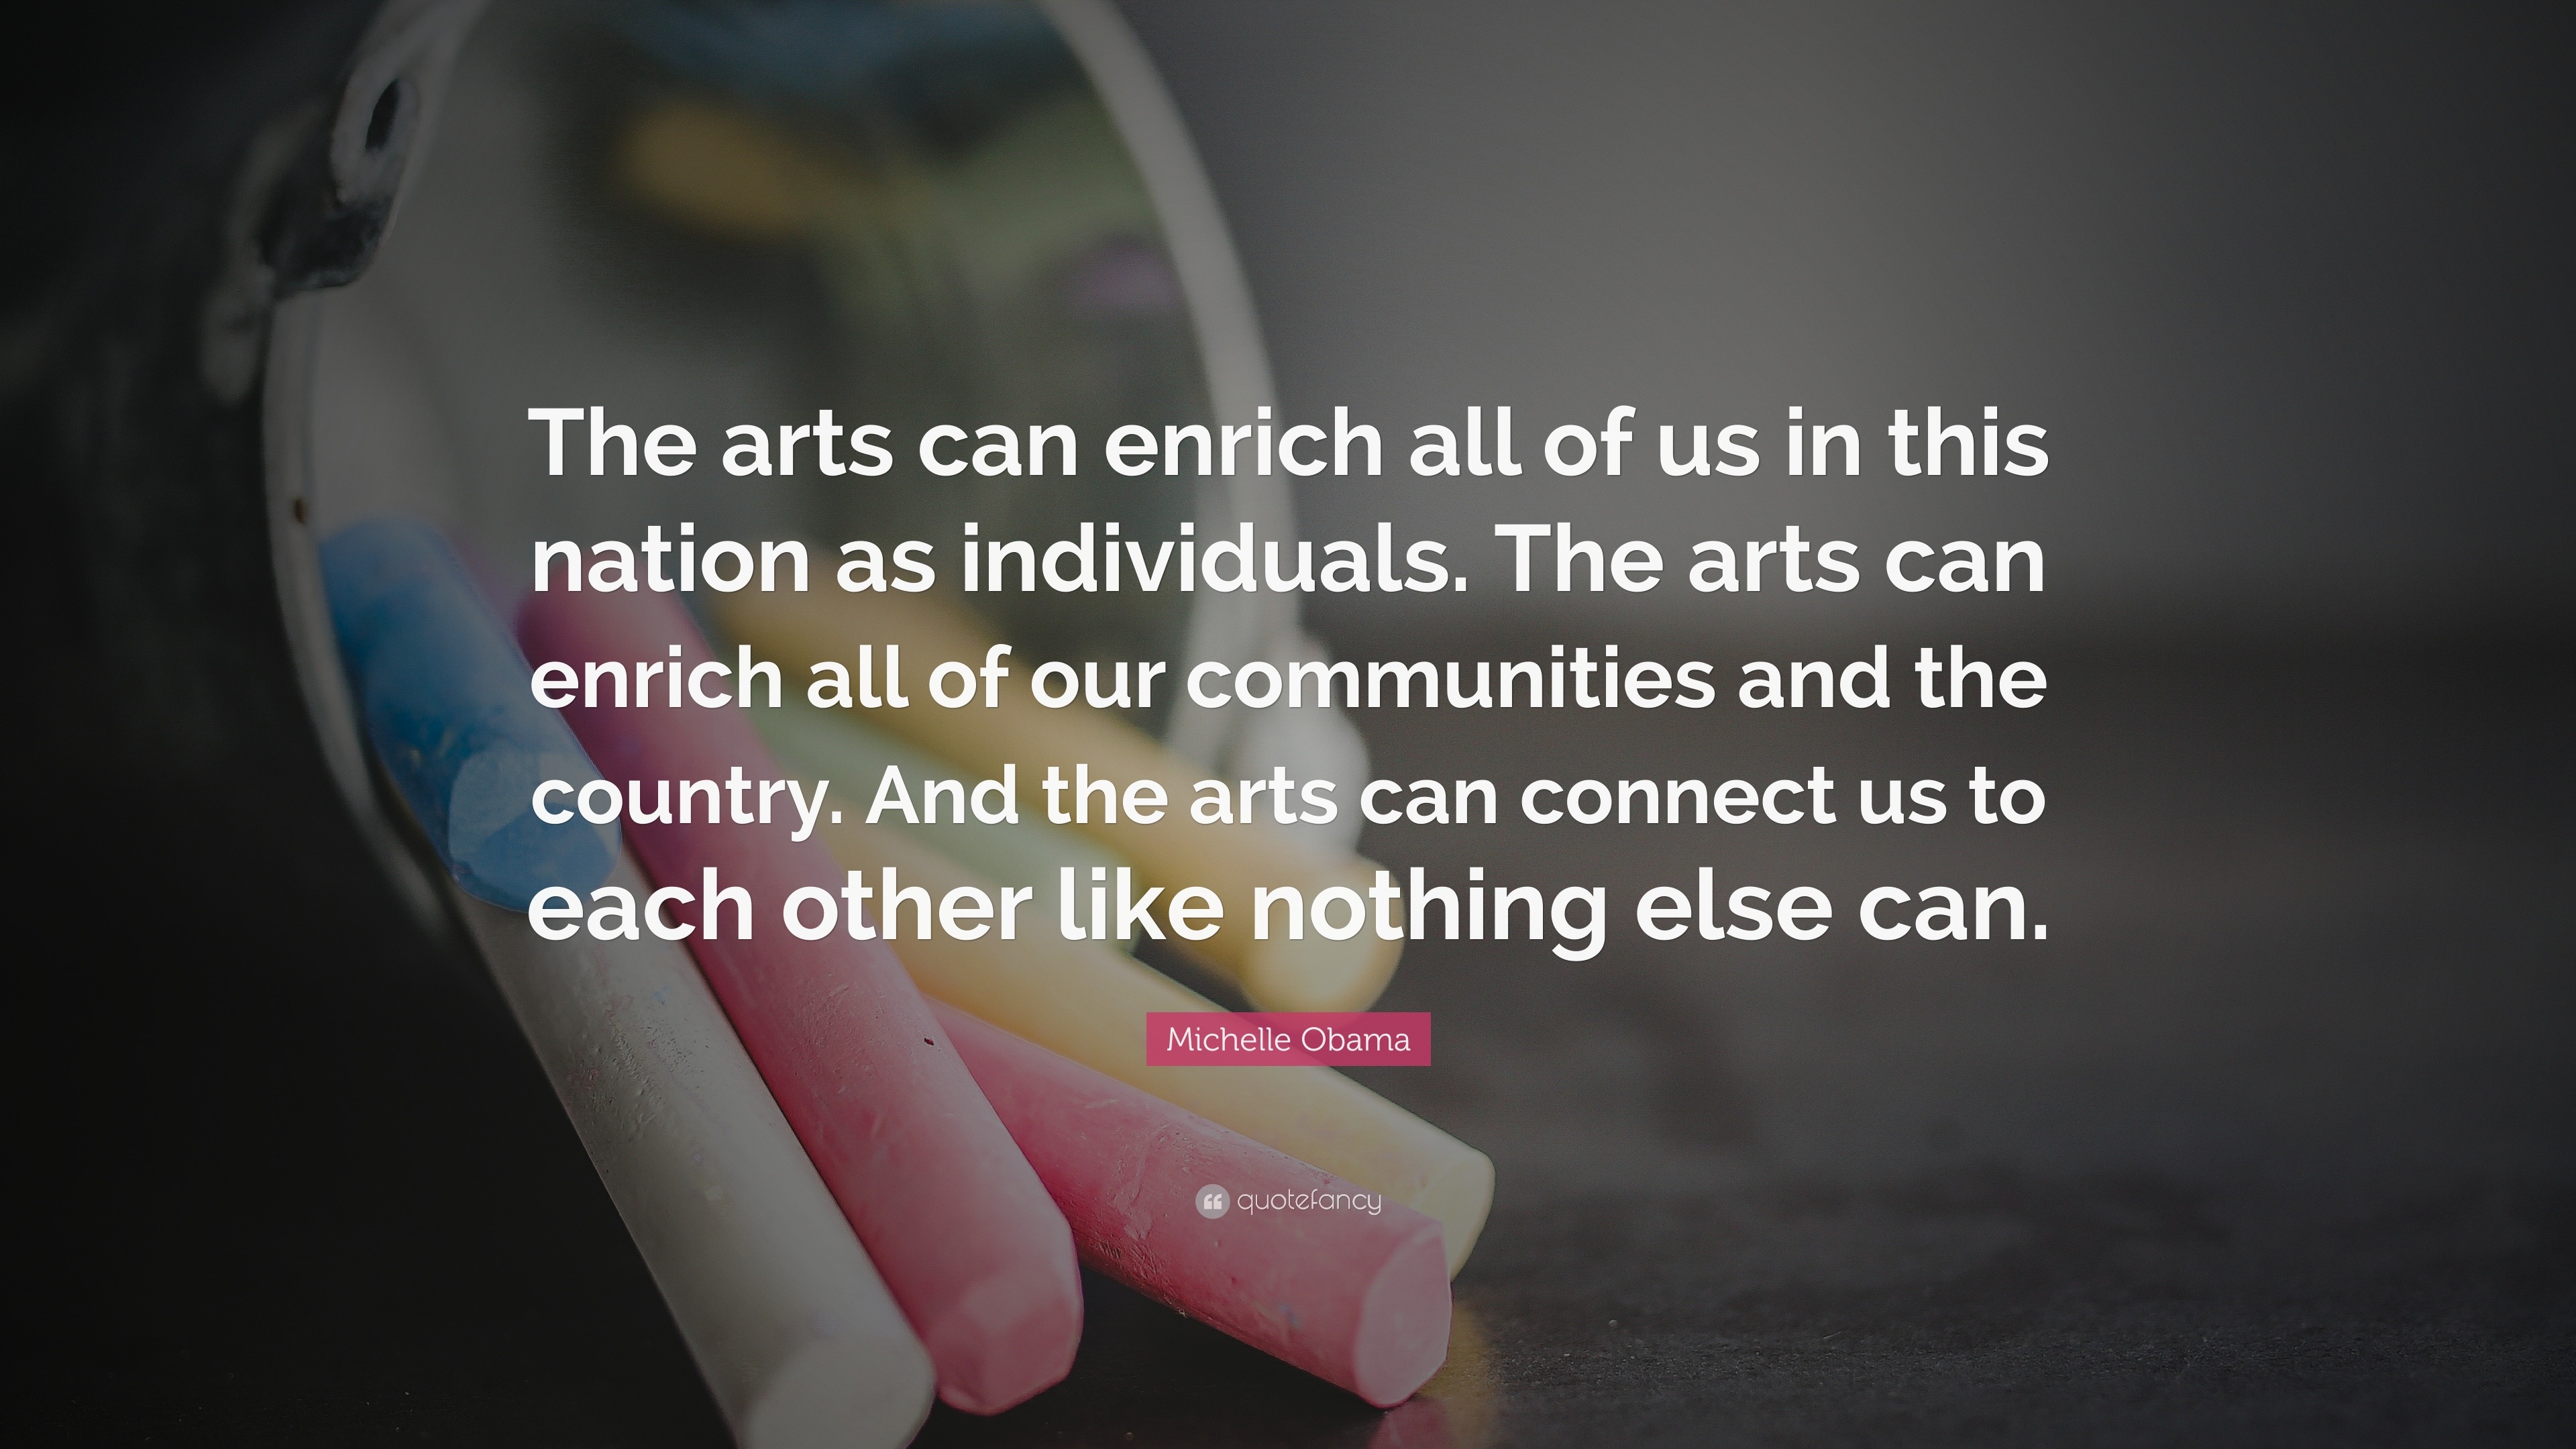 Michelle Obama Quote: “The arts can enrich all of us in this nation as individuals ...3840 x 2160